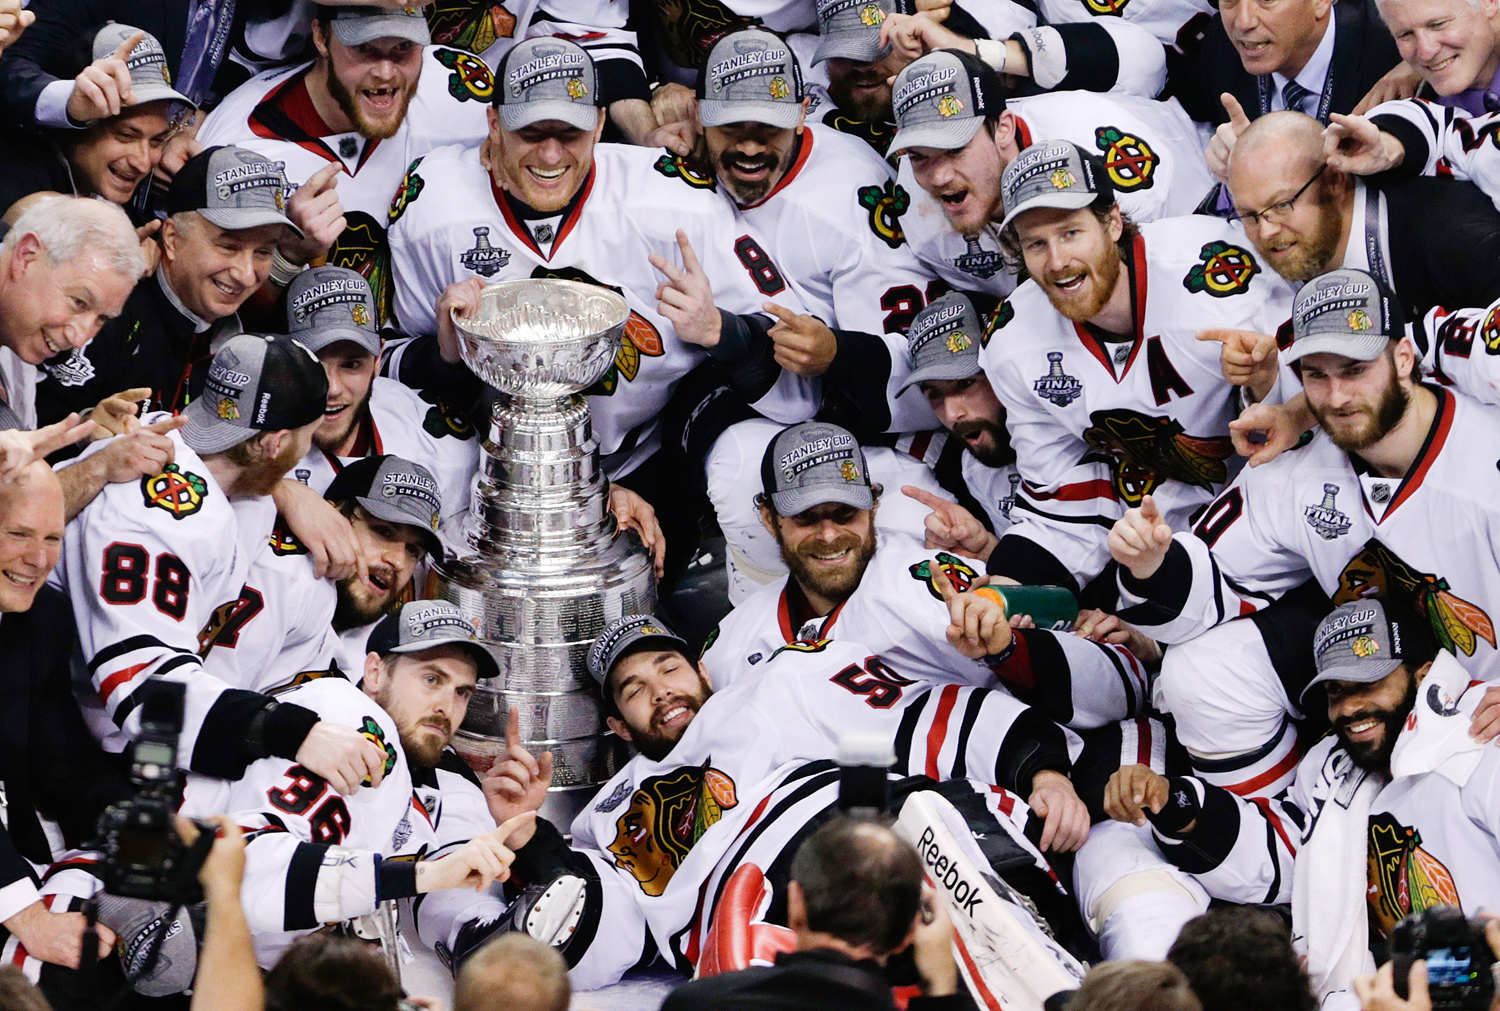 Remembering the Chicago Blackhawks' Stanley Cup win ten years